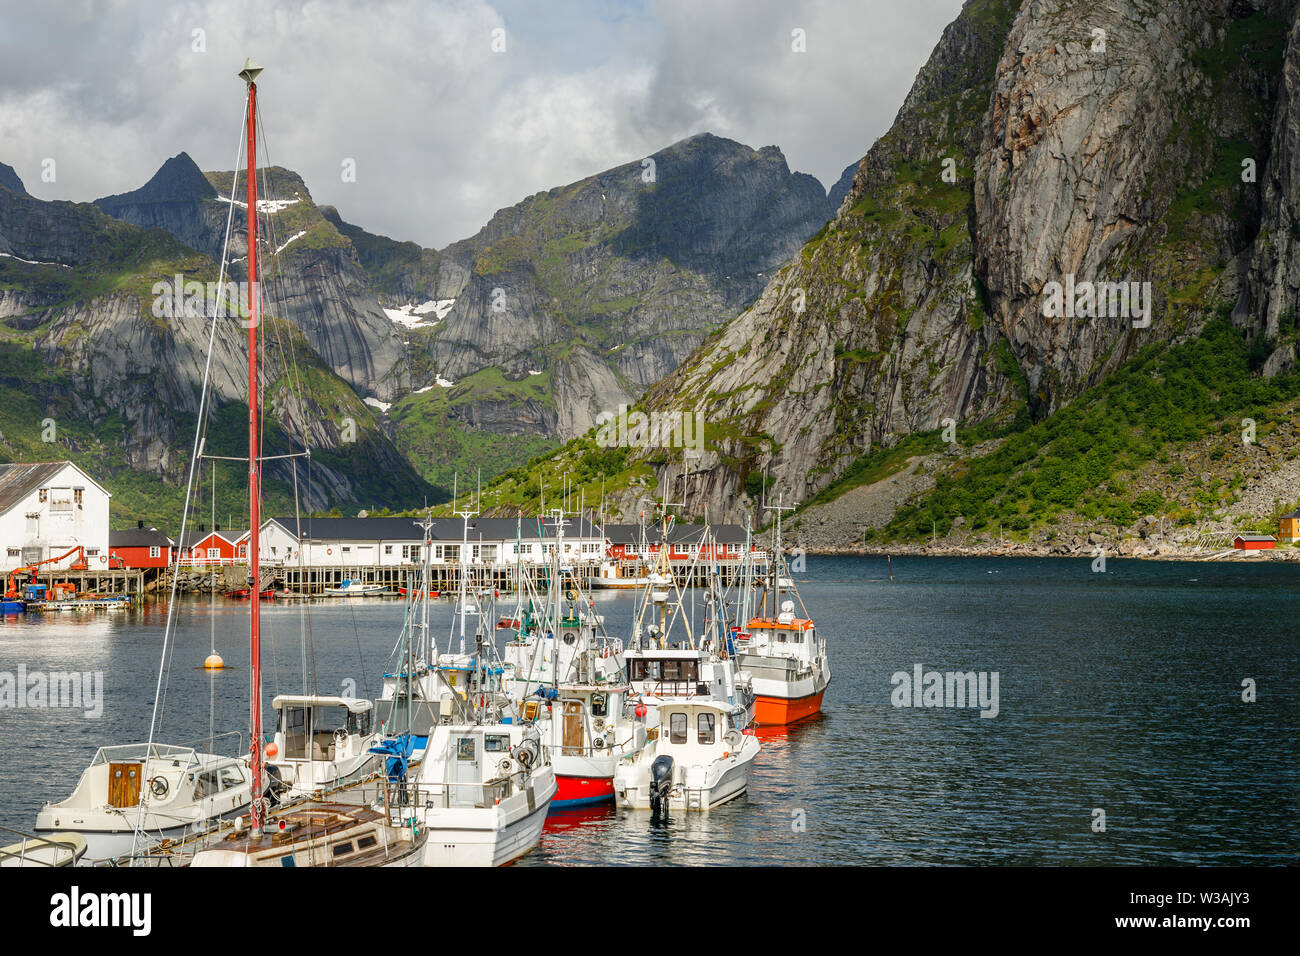 Yachts and boats with mountains in the background at pier in Reine, Moskenesoya, Lototen islands,, Nordland County, Norway Stock Photo